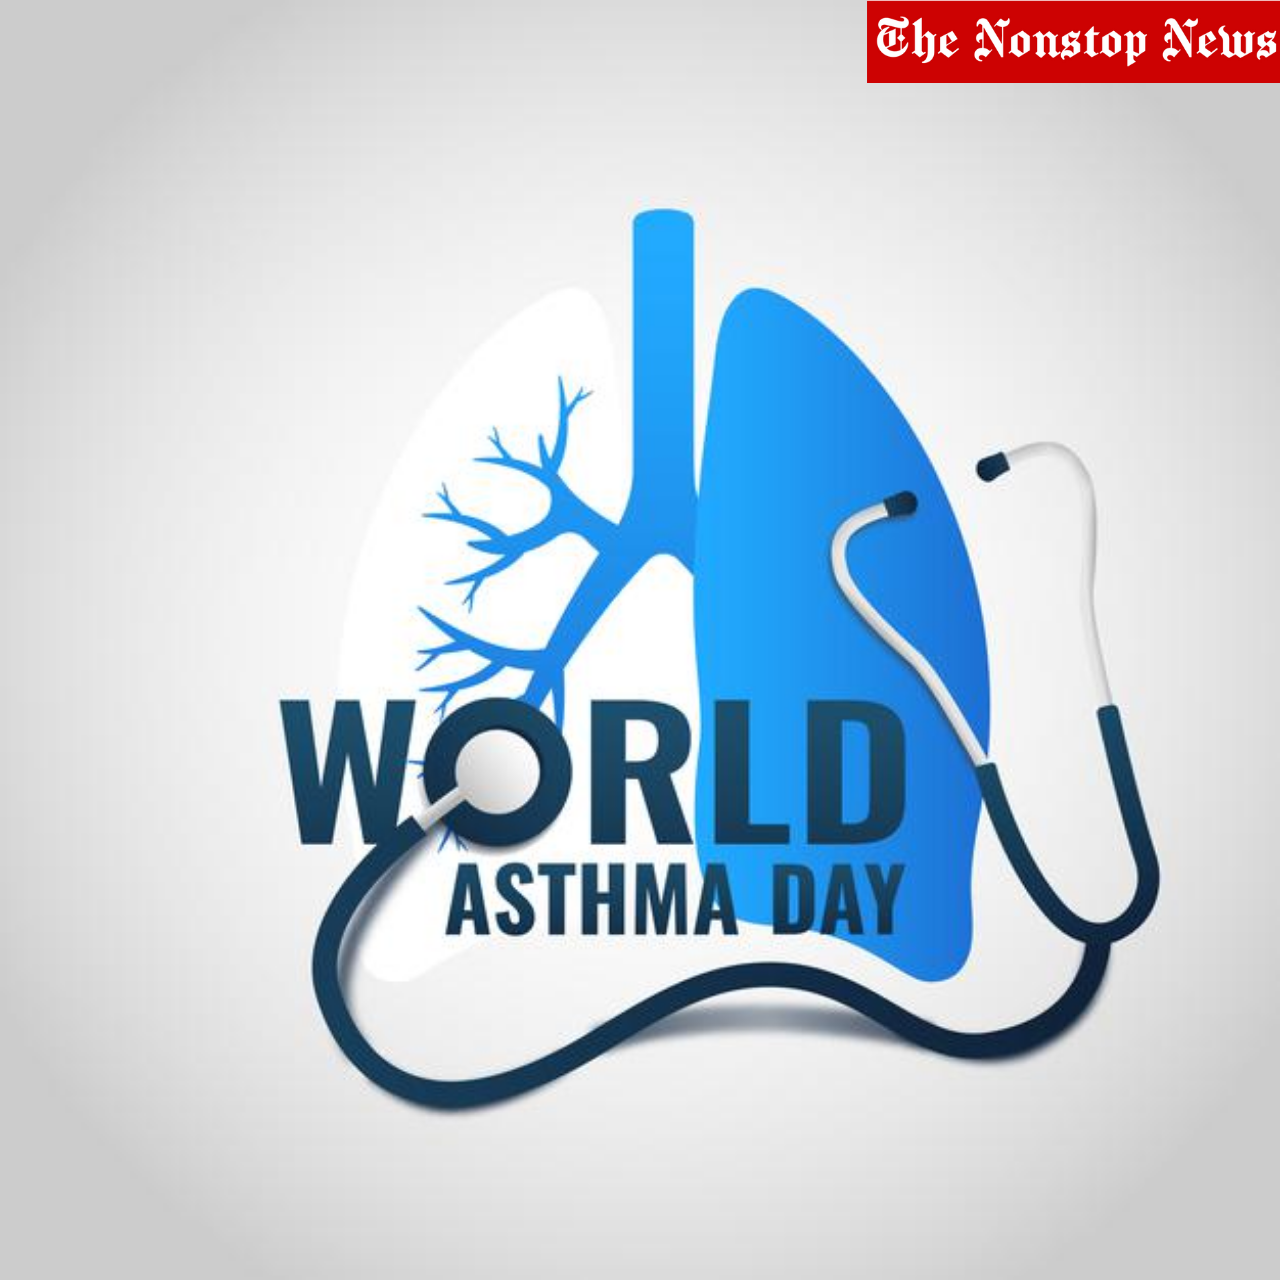 World Asthma Day 2021 Quotes, Greetings, Images, and Posters to Share